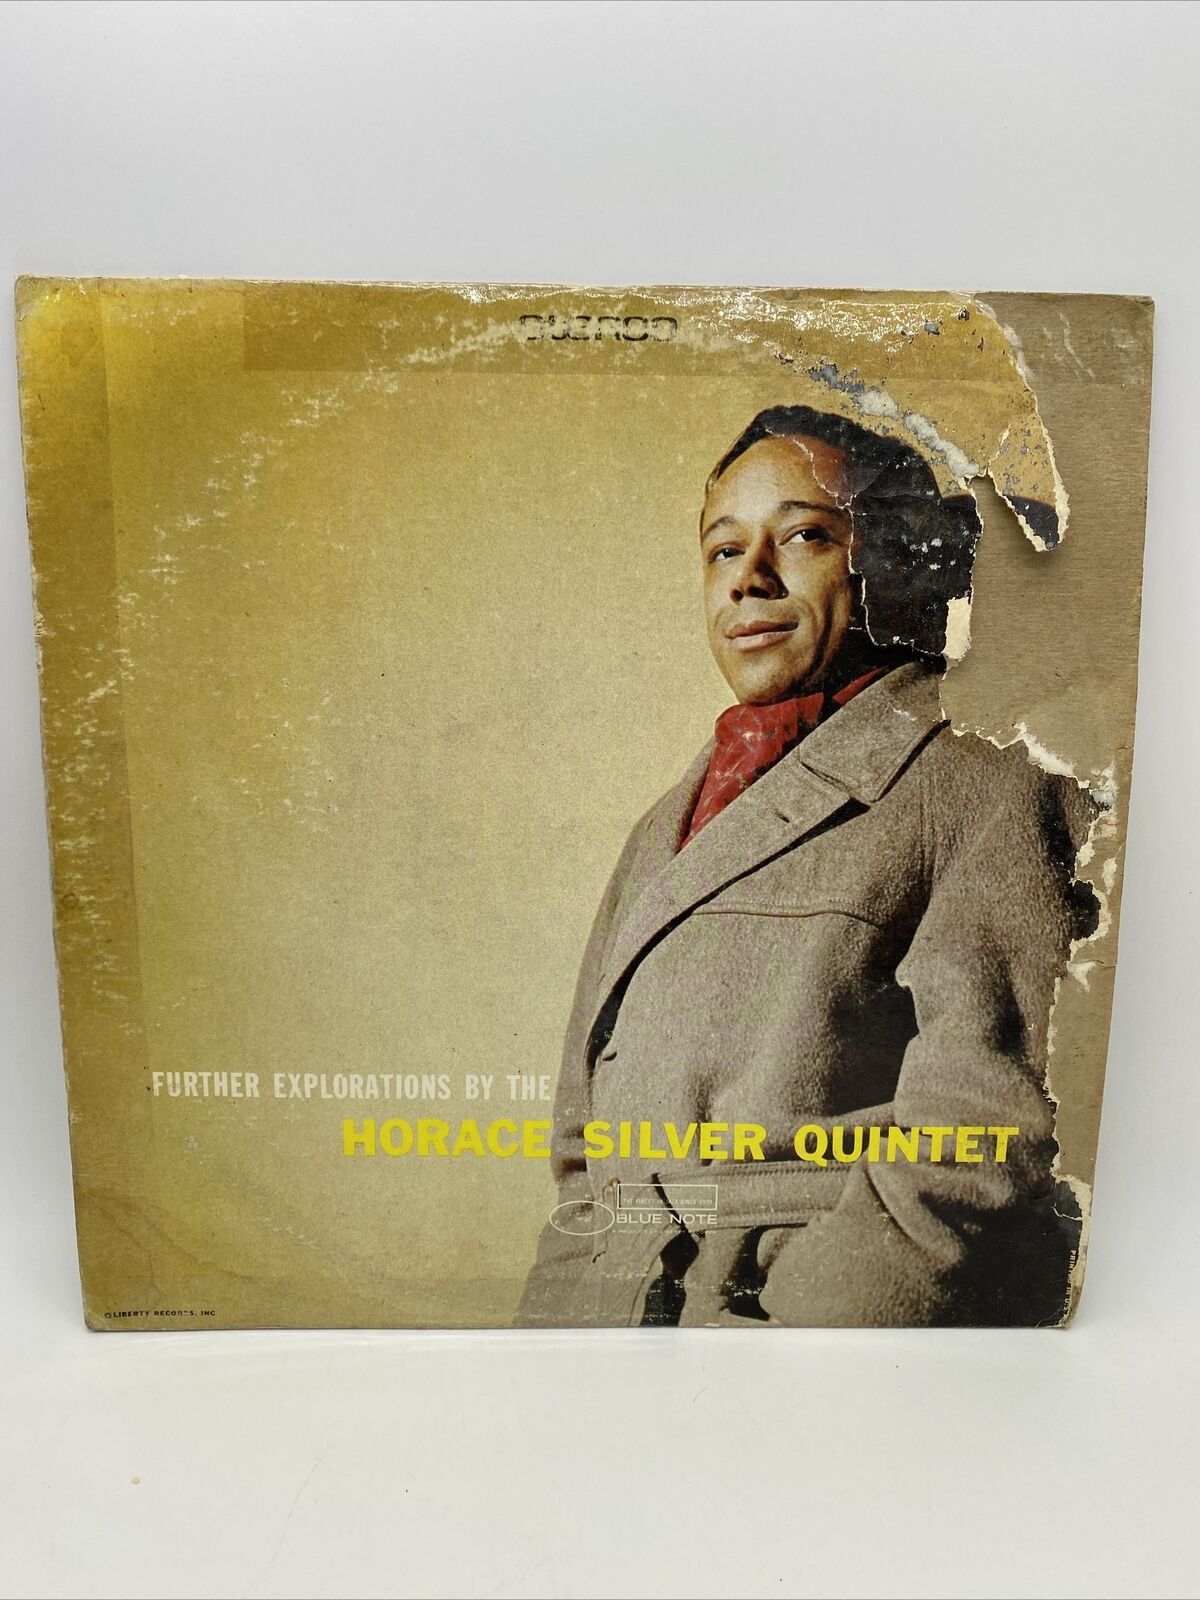 Further Explorations By The Horace Silver Quintet LP Blue Note Records BLP-1589